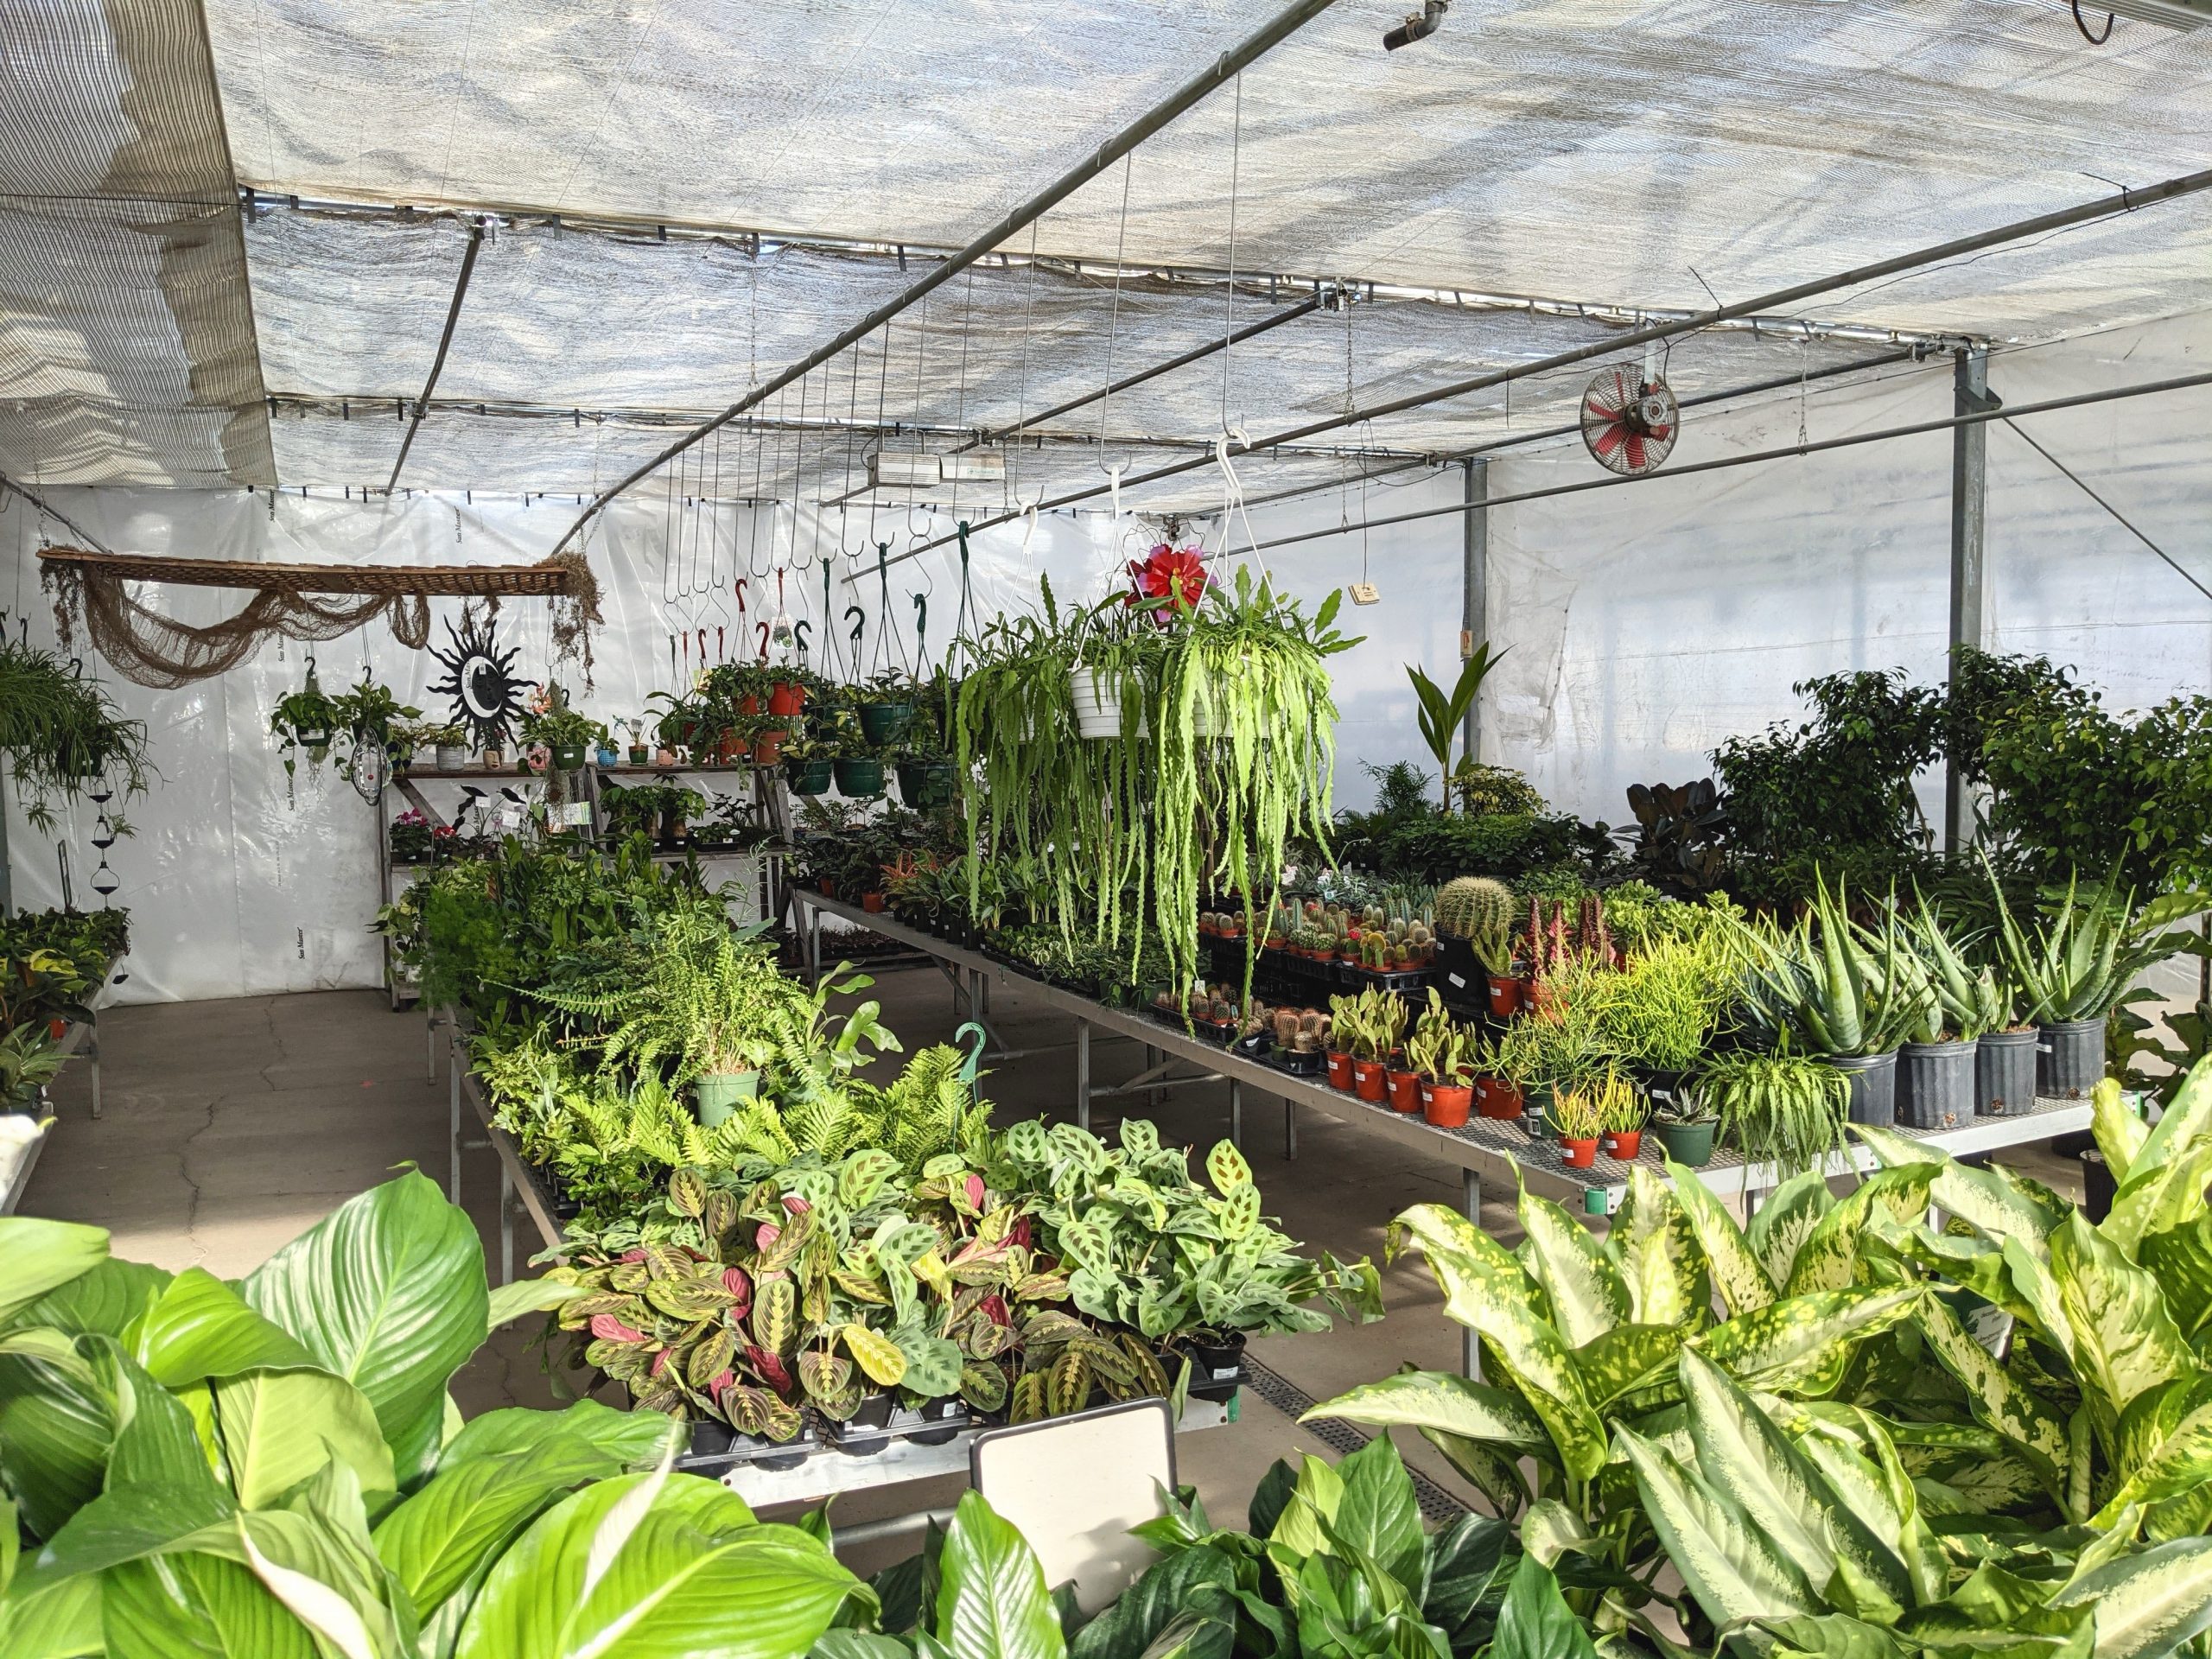 large variety of houseplants in the greenhouse